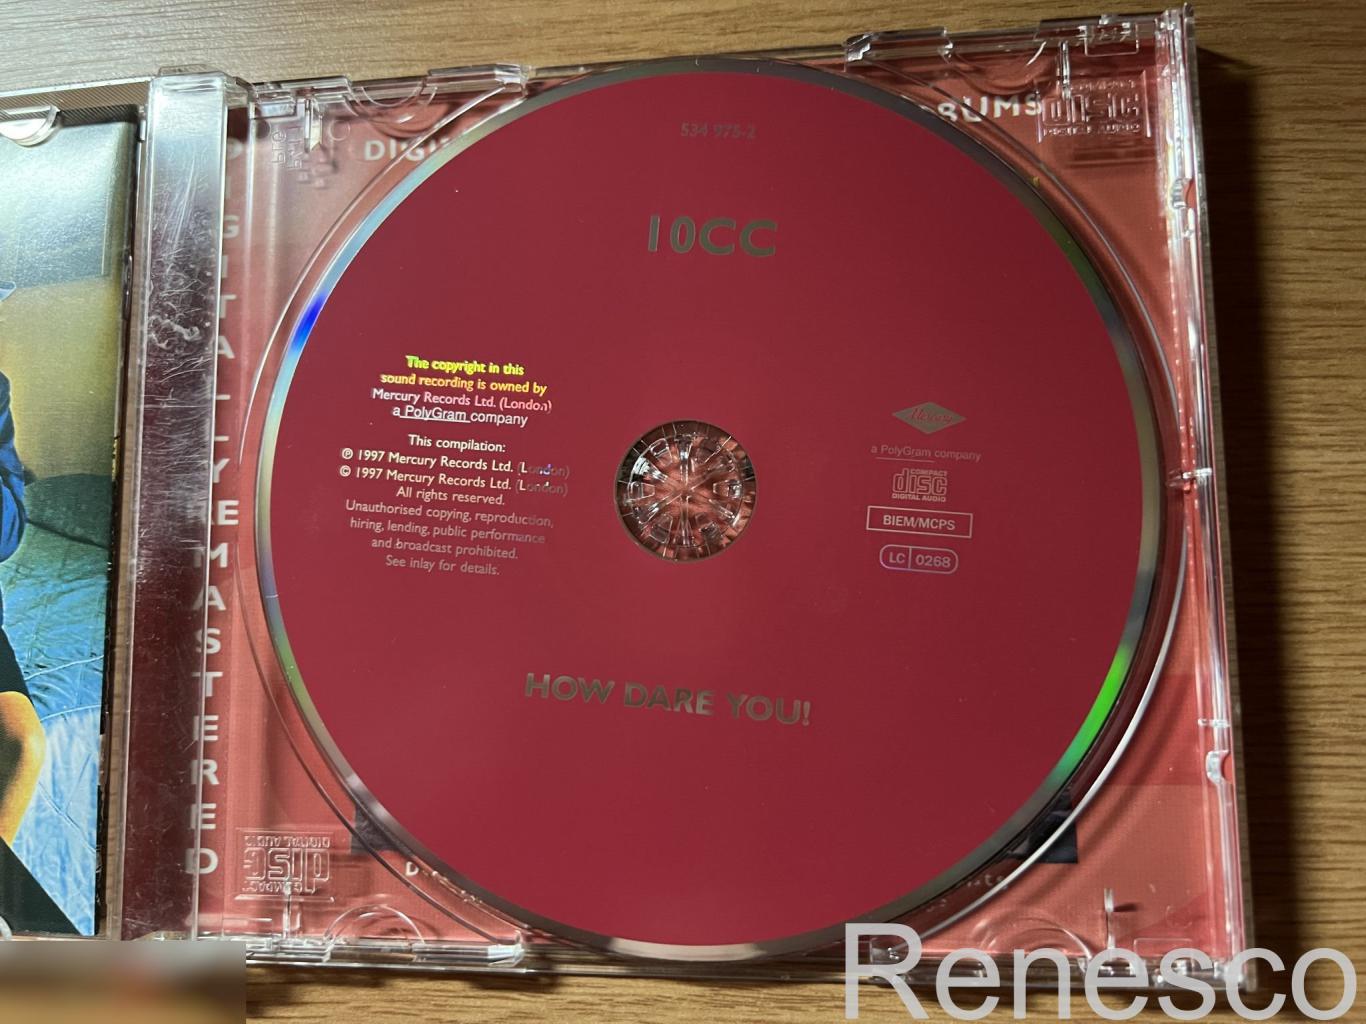 10cc – How Dare You! (Germany) (1997) (Reissue) (Remastered) 4